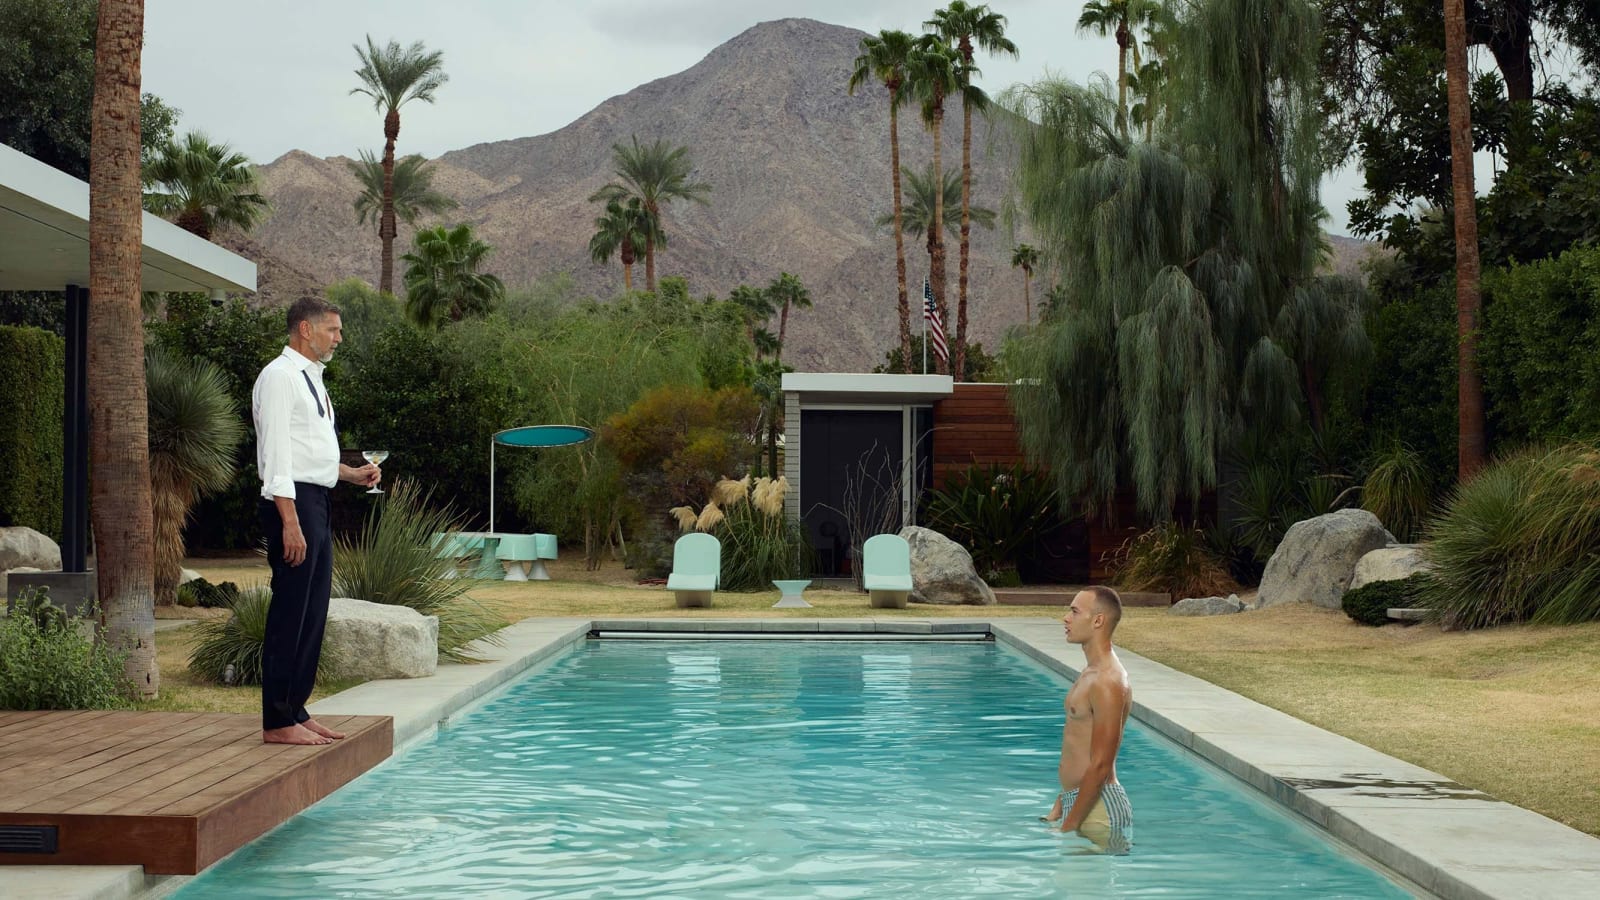 Young man standing in pool in Palm Springs, looking at older man holding martini glass at edge of pool, by Erwin Olaf